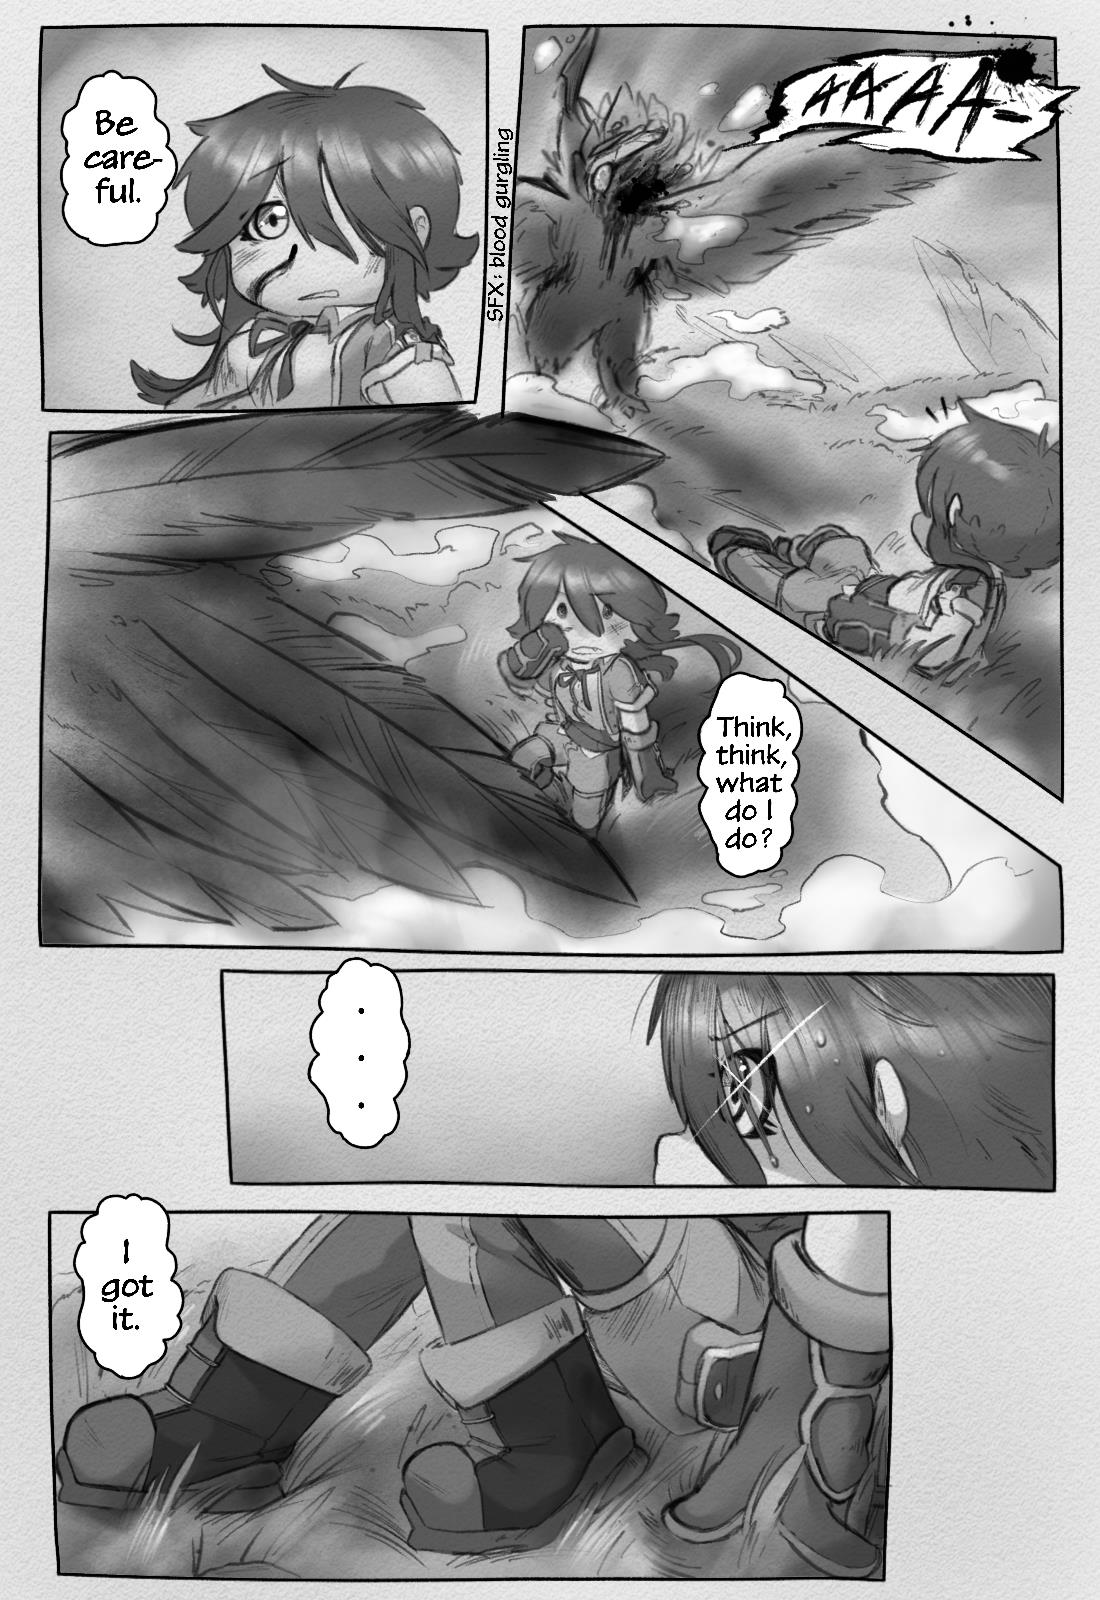 Made From Fortunes (Made In Abyss Fanmade Comic) Vol.1 Chapter 4: Seeing Stars - Picture 3